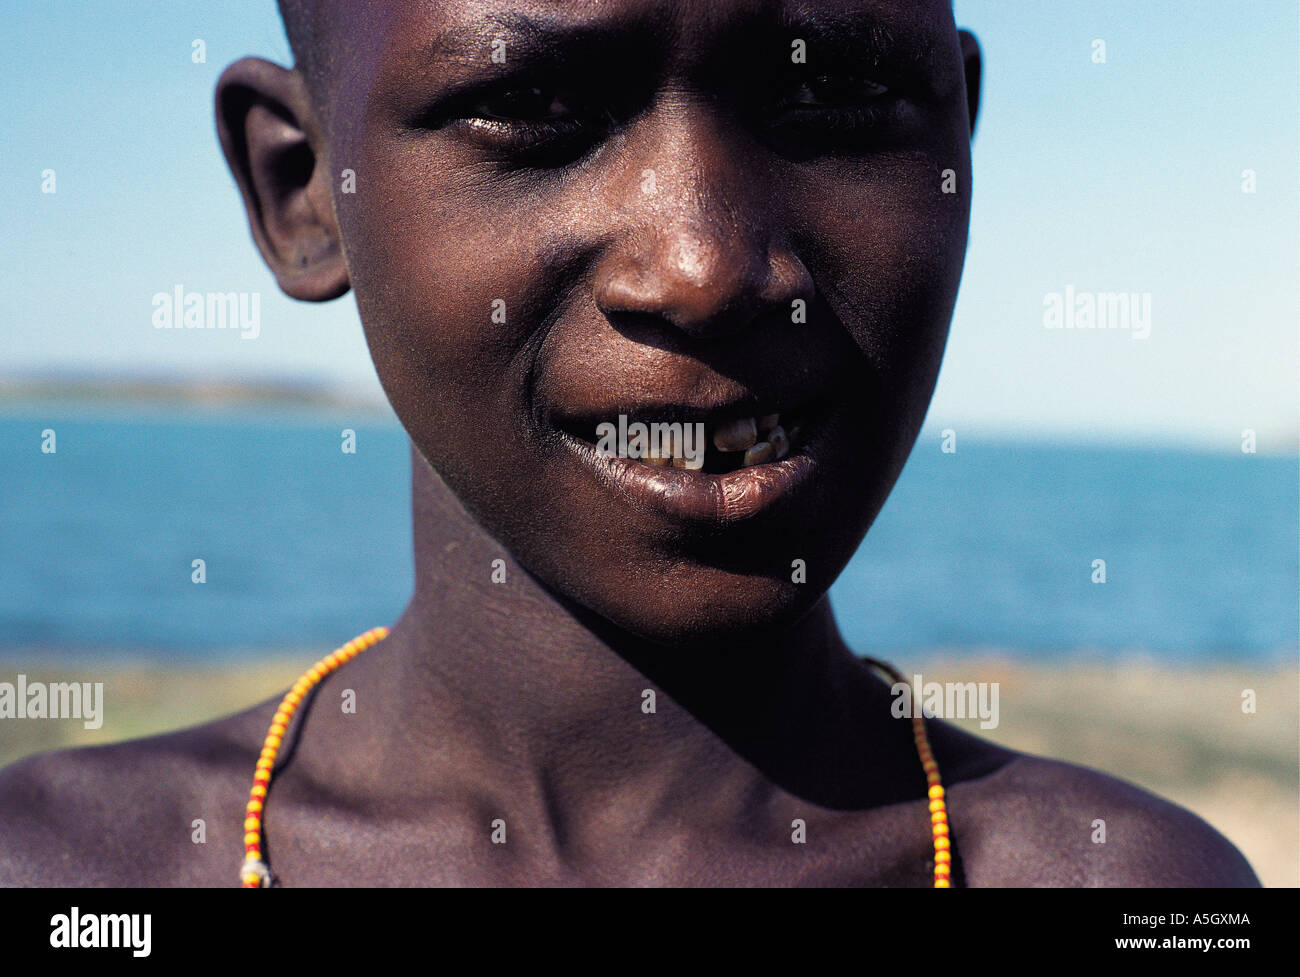 El Molo boy with teeth stained brown by excess minerals and fluoride in the water El Molo Bay Lake Turkana Kenya Stock Photo